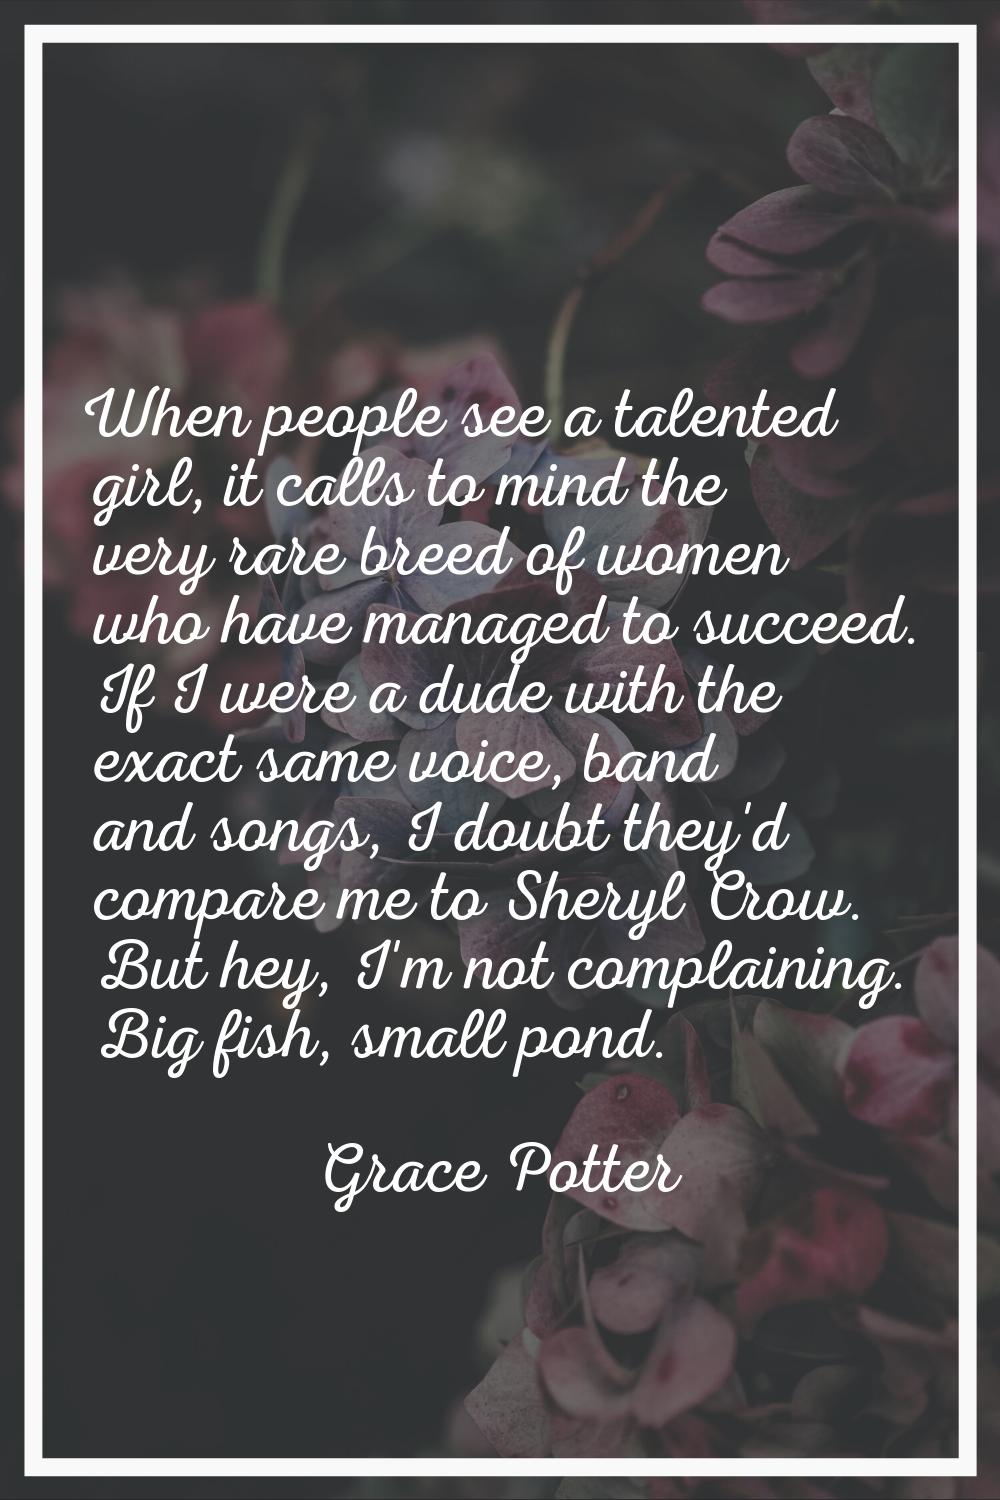 When people see a talented girl, it calls to mind the very rare breed of women who have managed to 